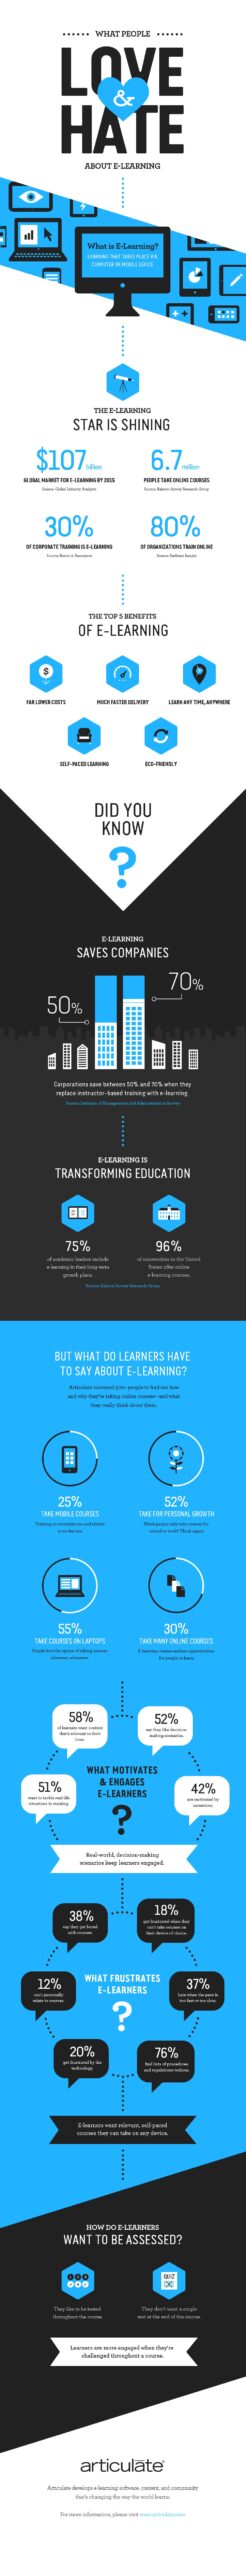 Articulate-What-People-Love-Hate-about-e-Learning”-infographic